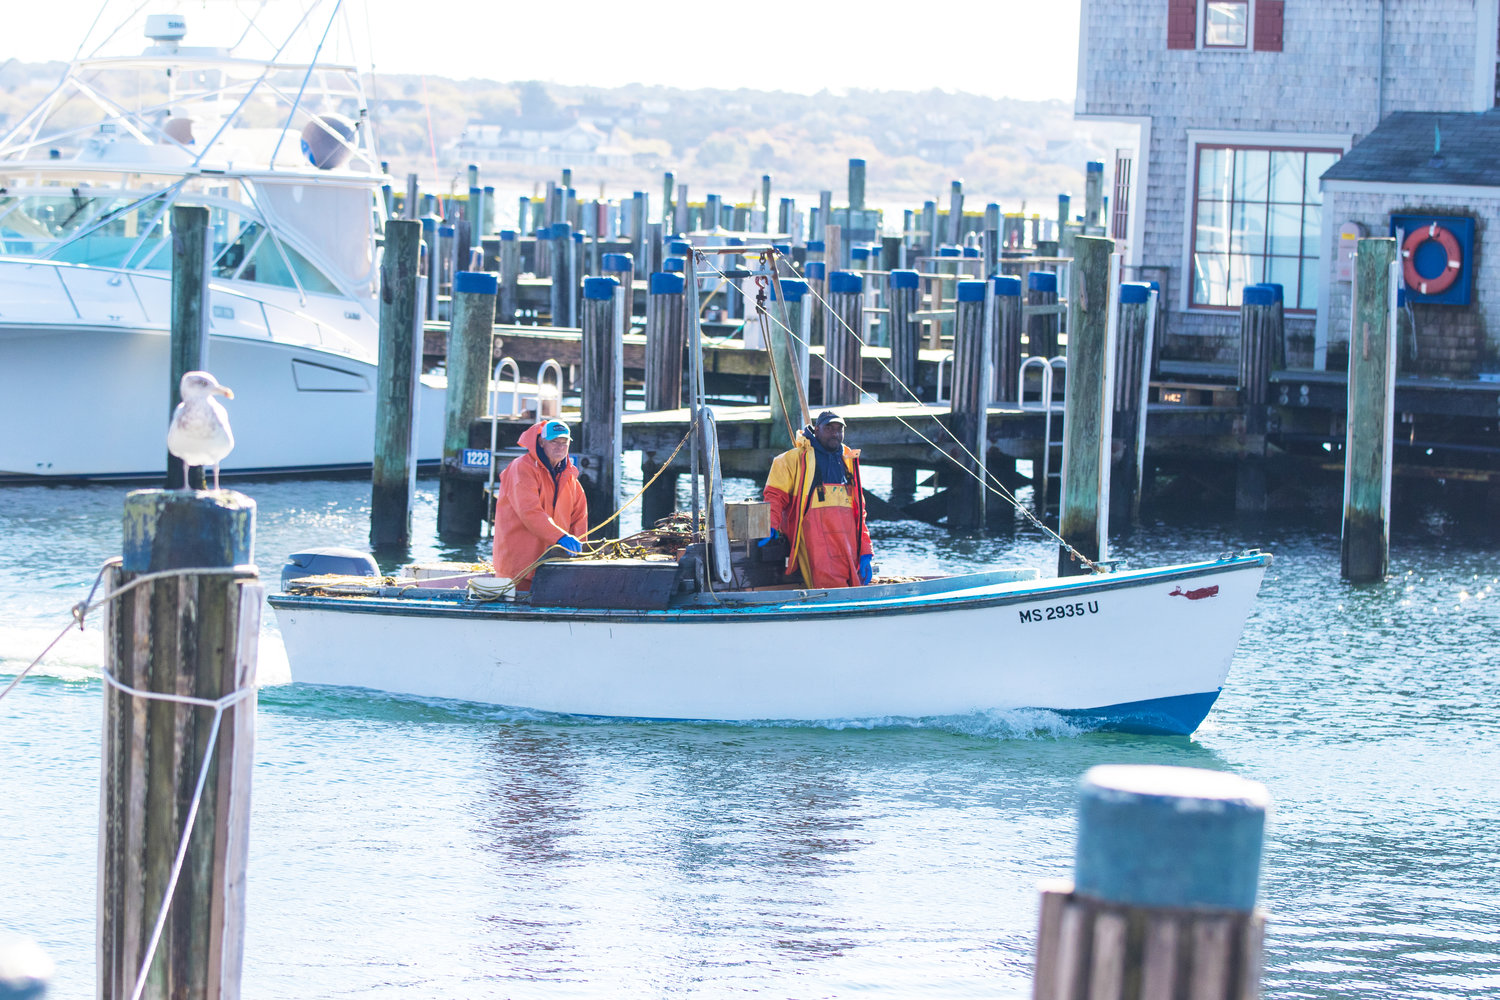 Scallopers return to the dock on the second day of commercial scalloping season last November.